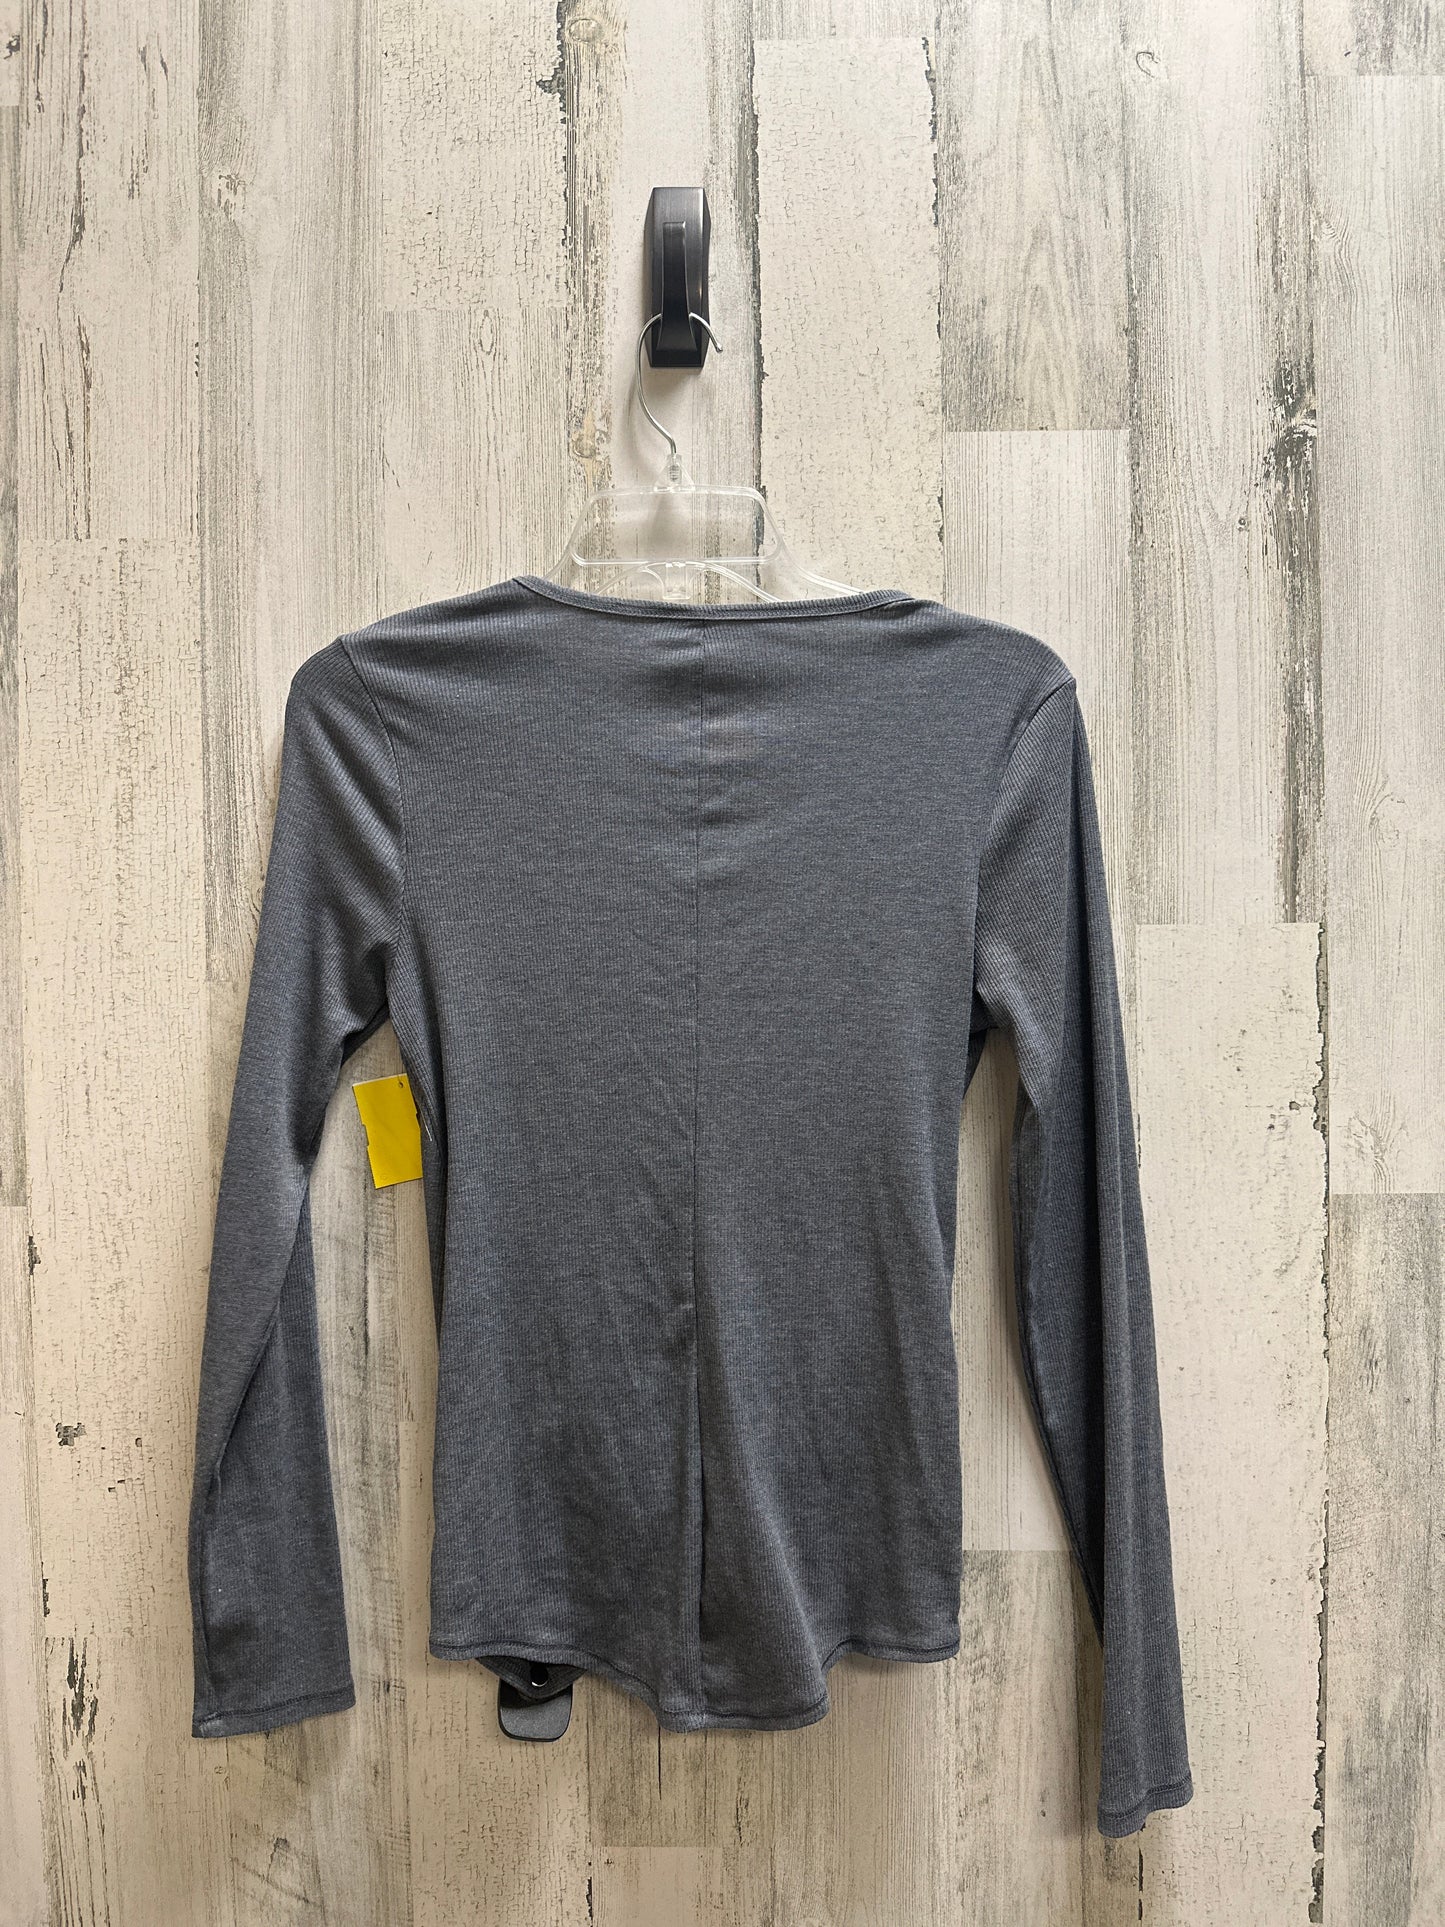 Top Long Sleeve By All In Motion  Size: M